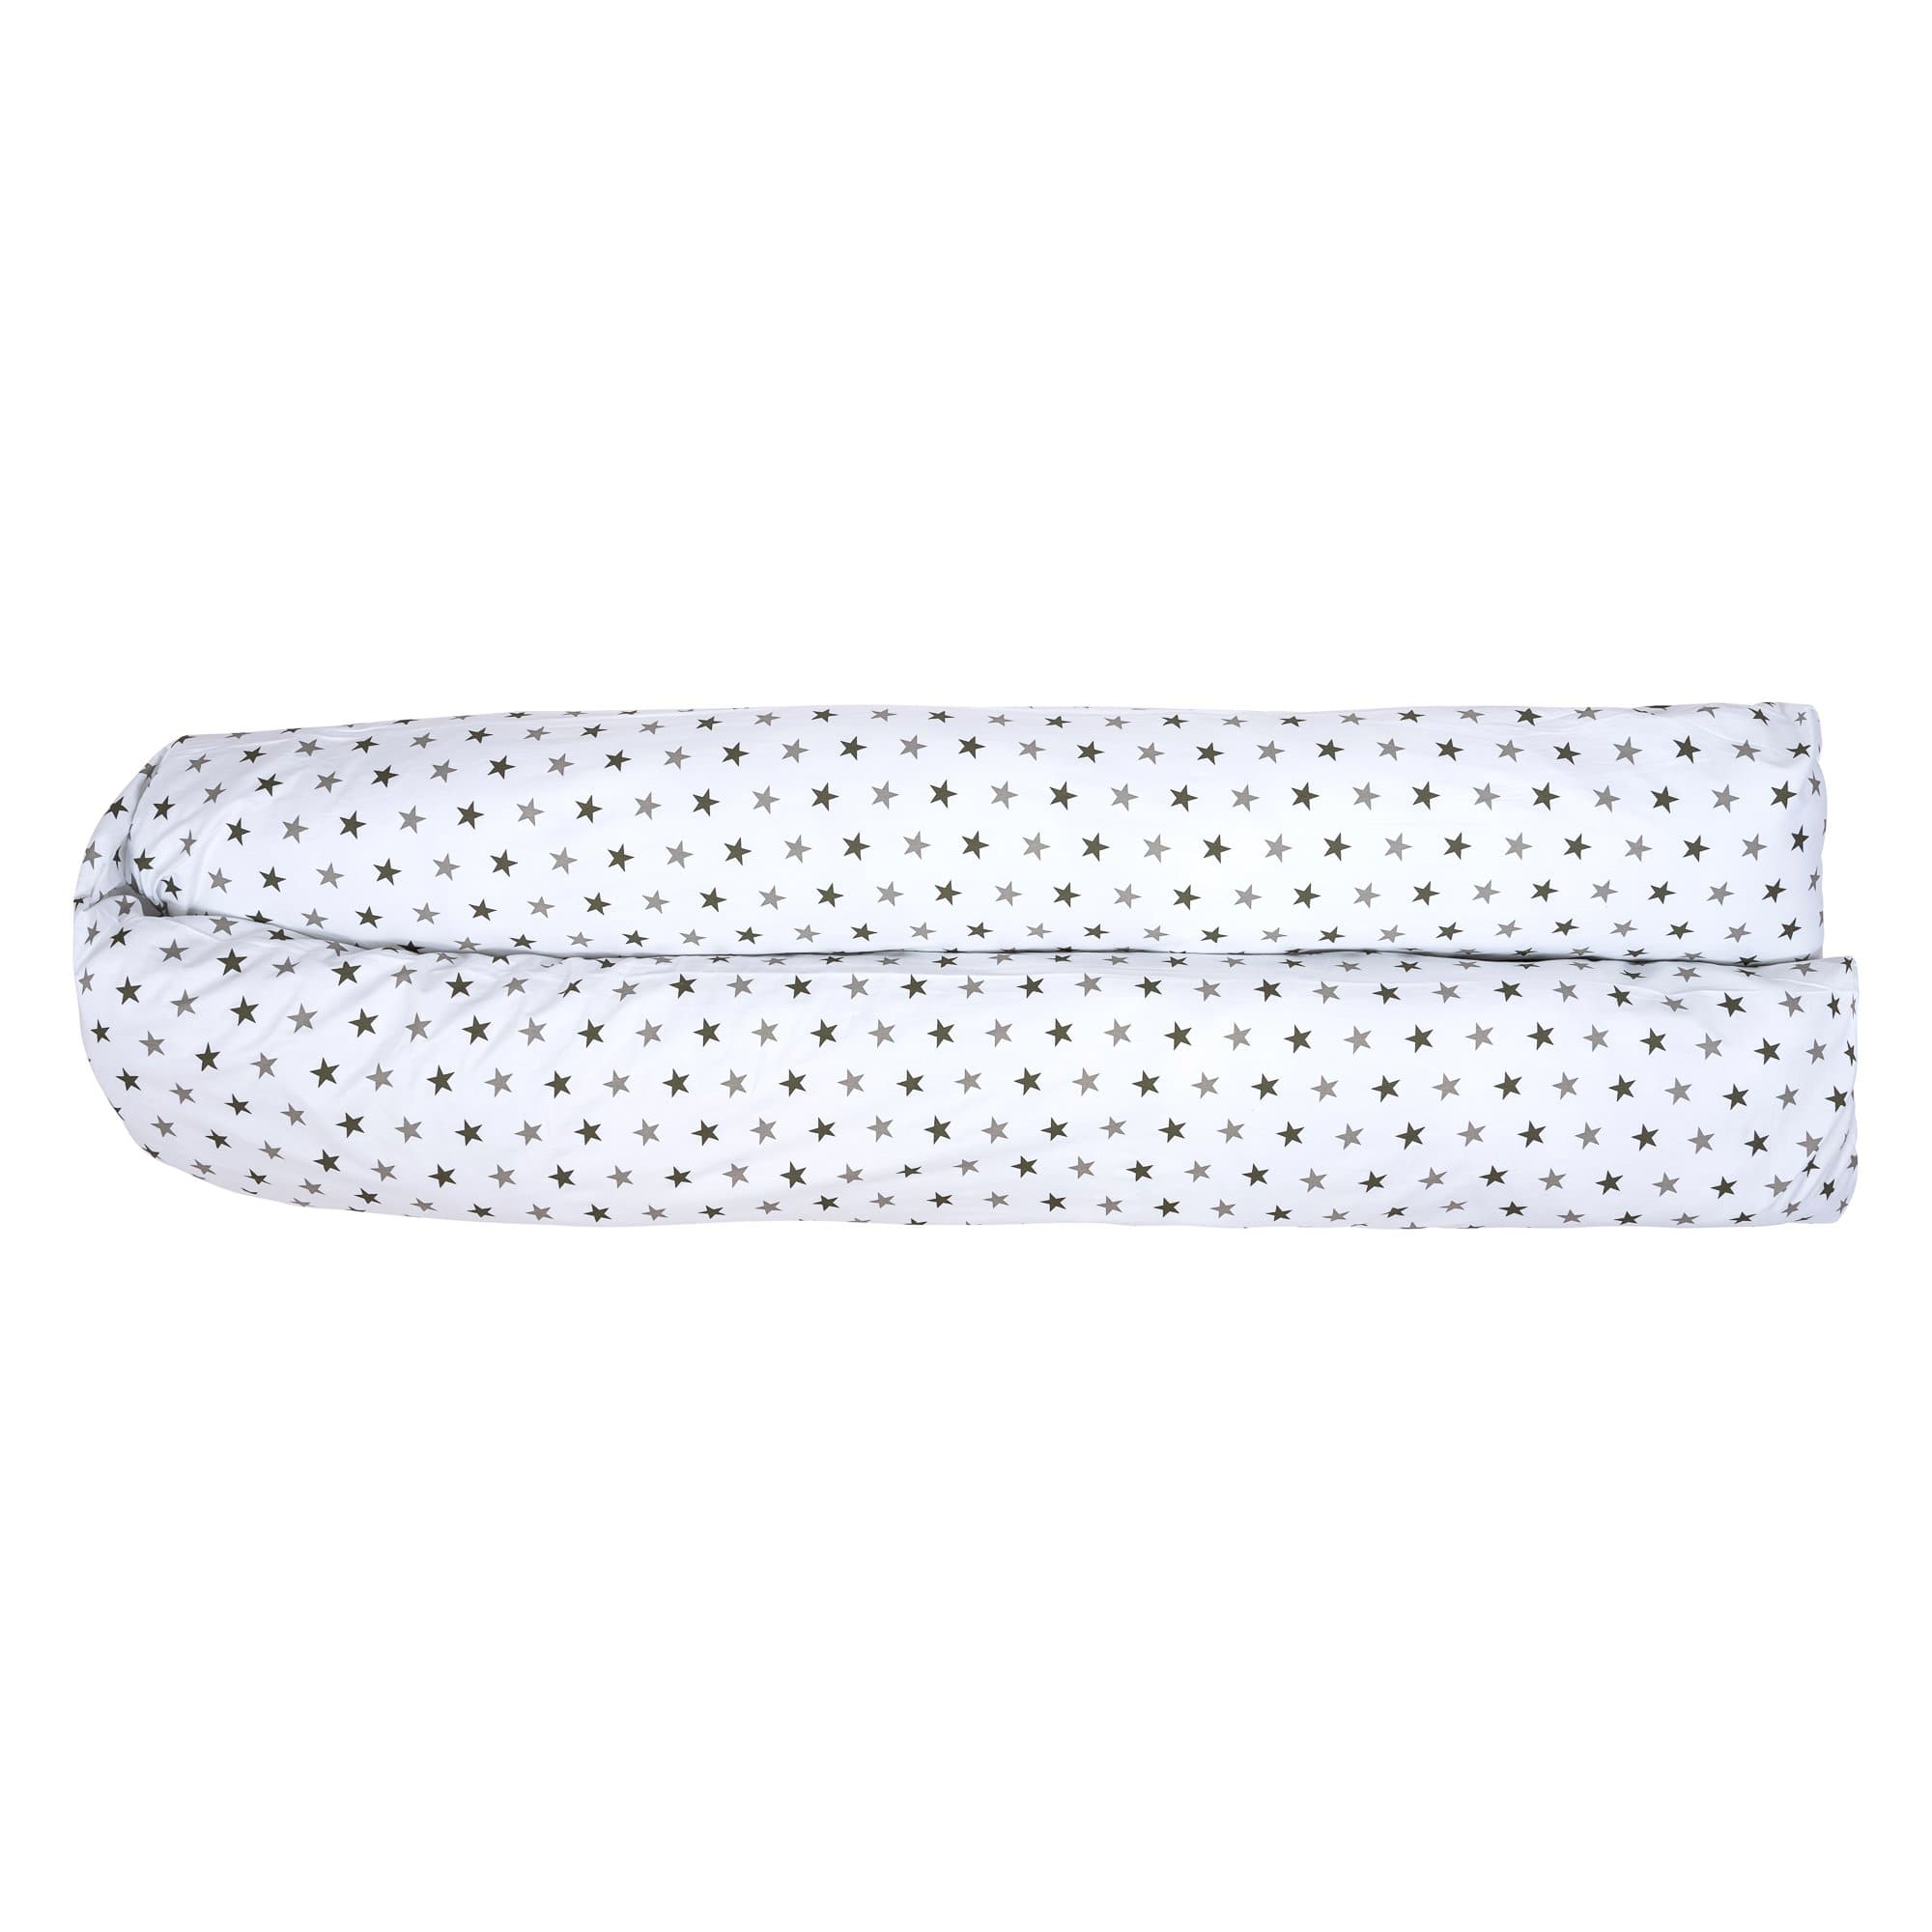 9 Ft Maternity Pillow And Case - Grey Star - For Your Little One